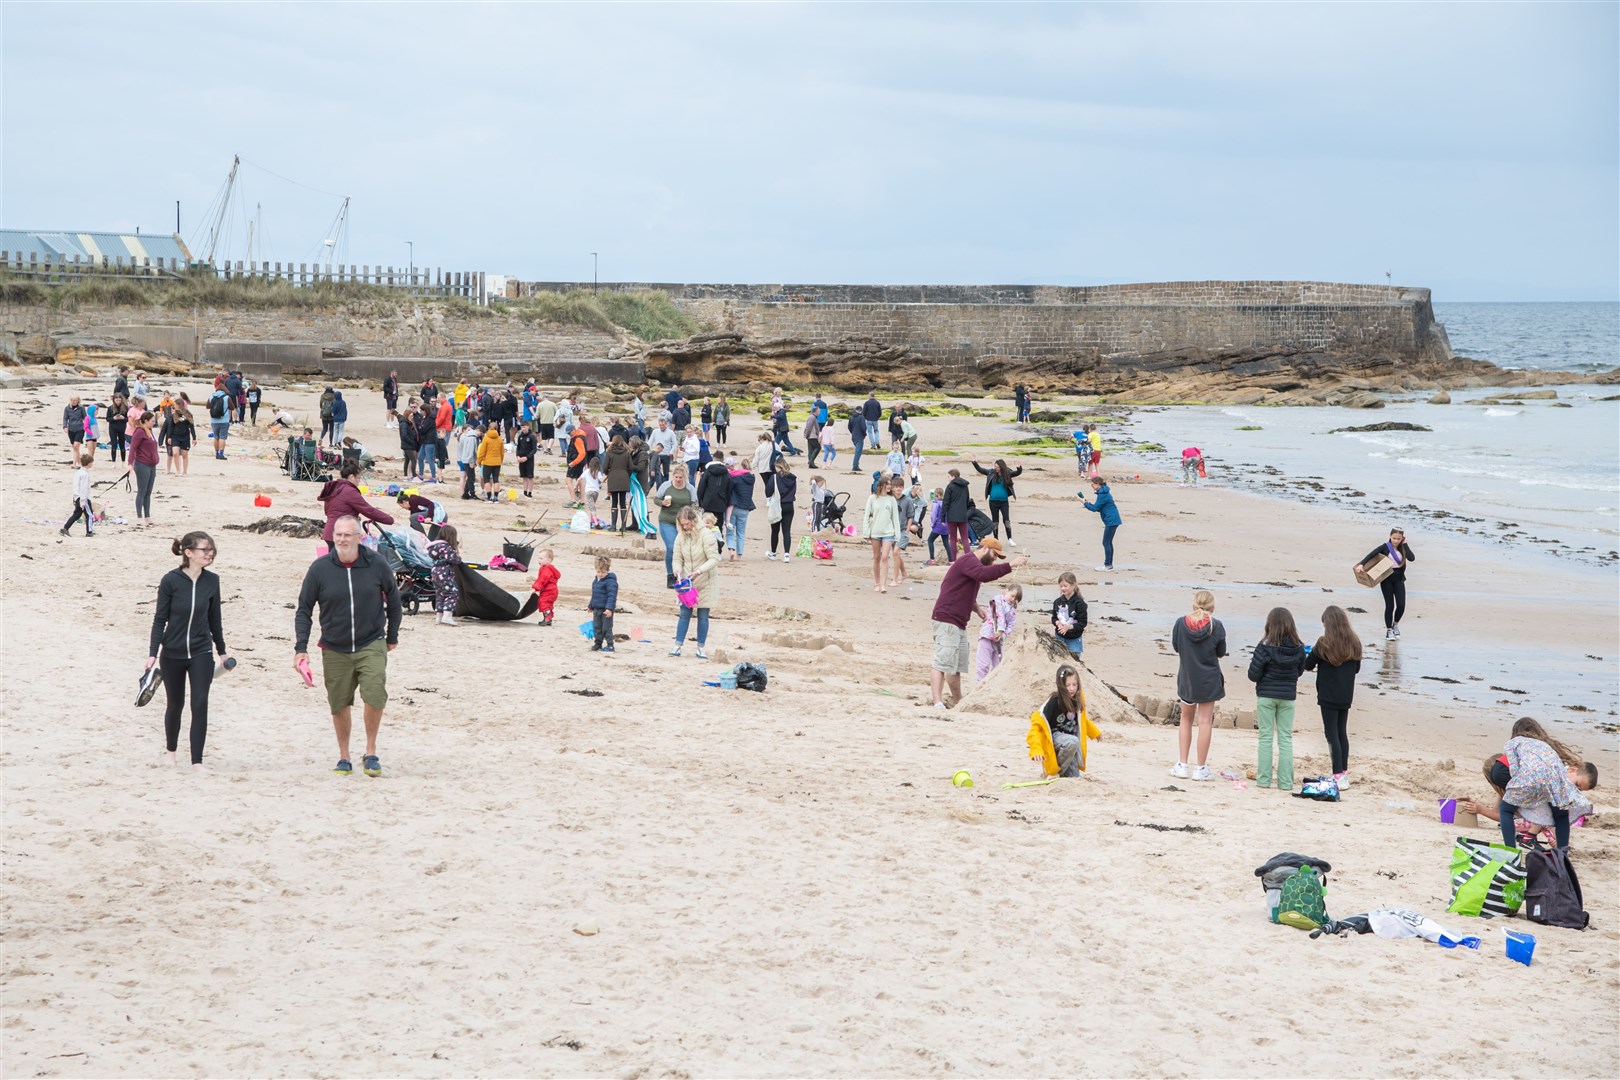 The beach was packed with over 30 entries taking part. Picture: Daniel Forsyth